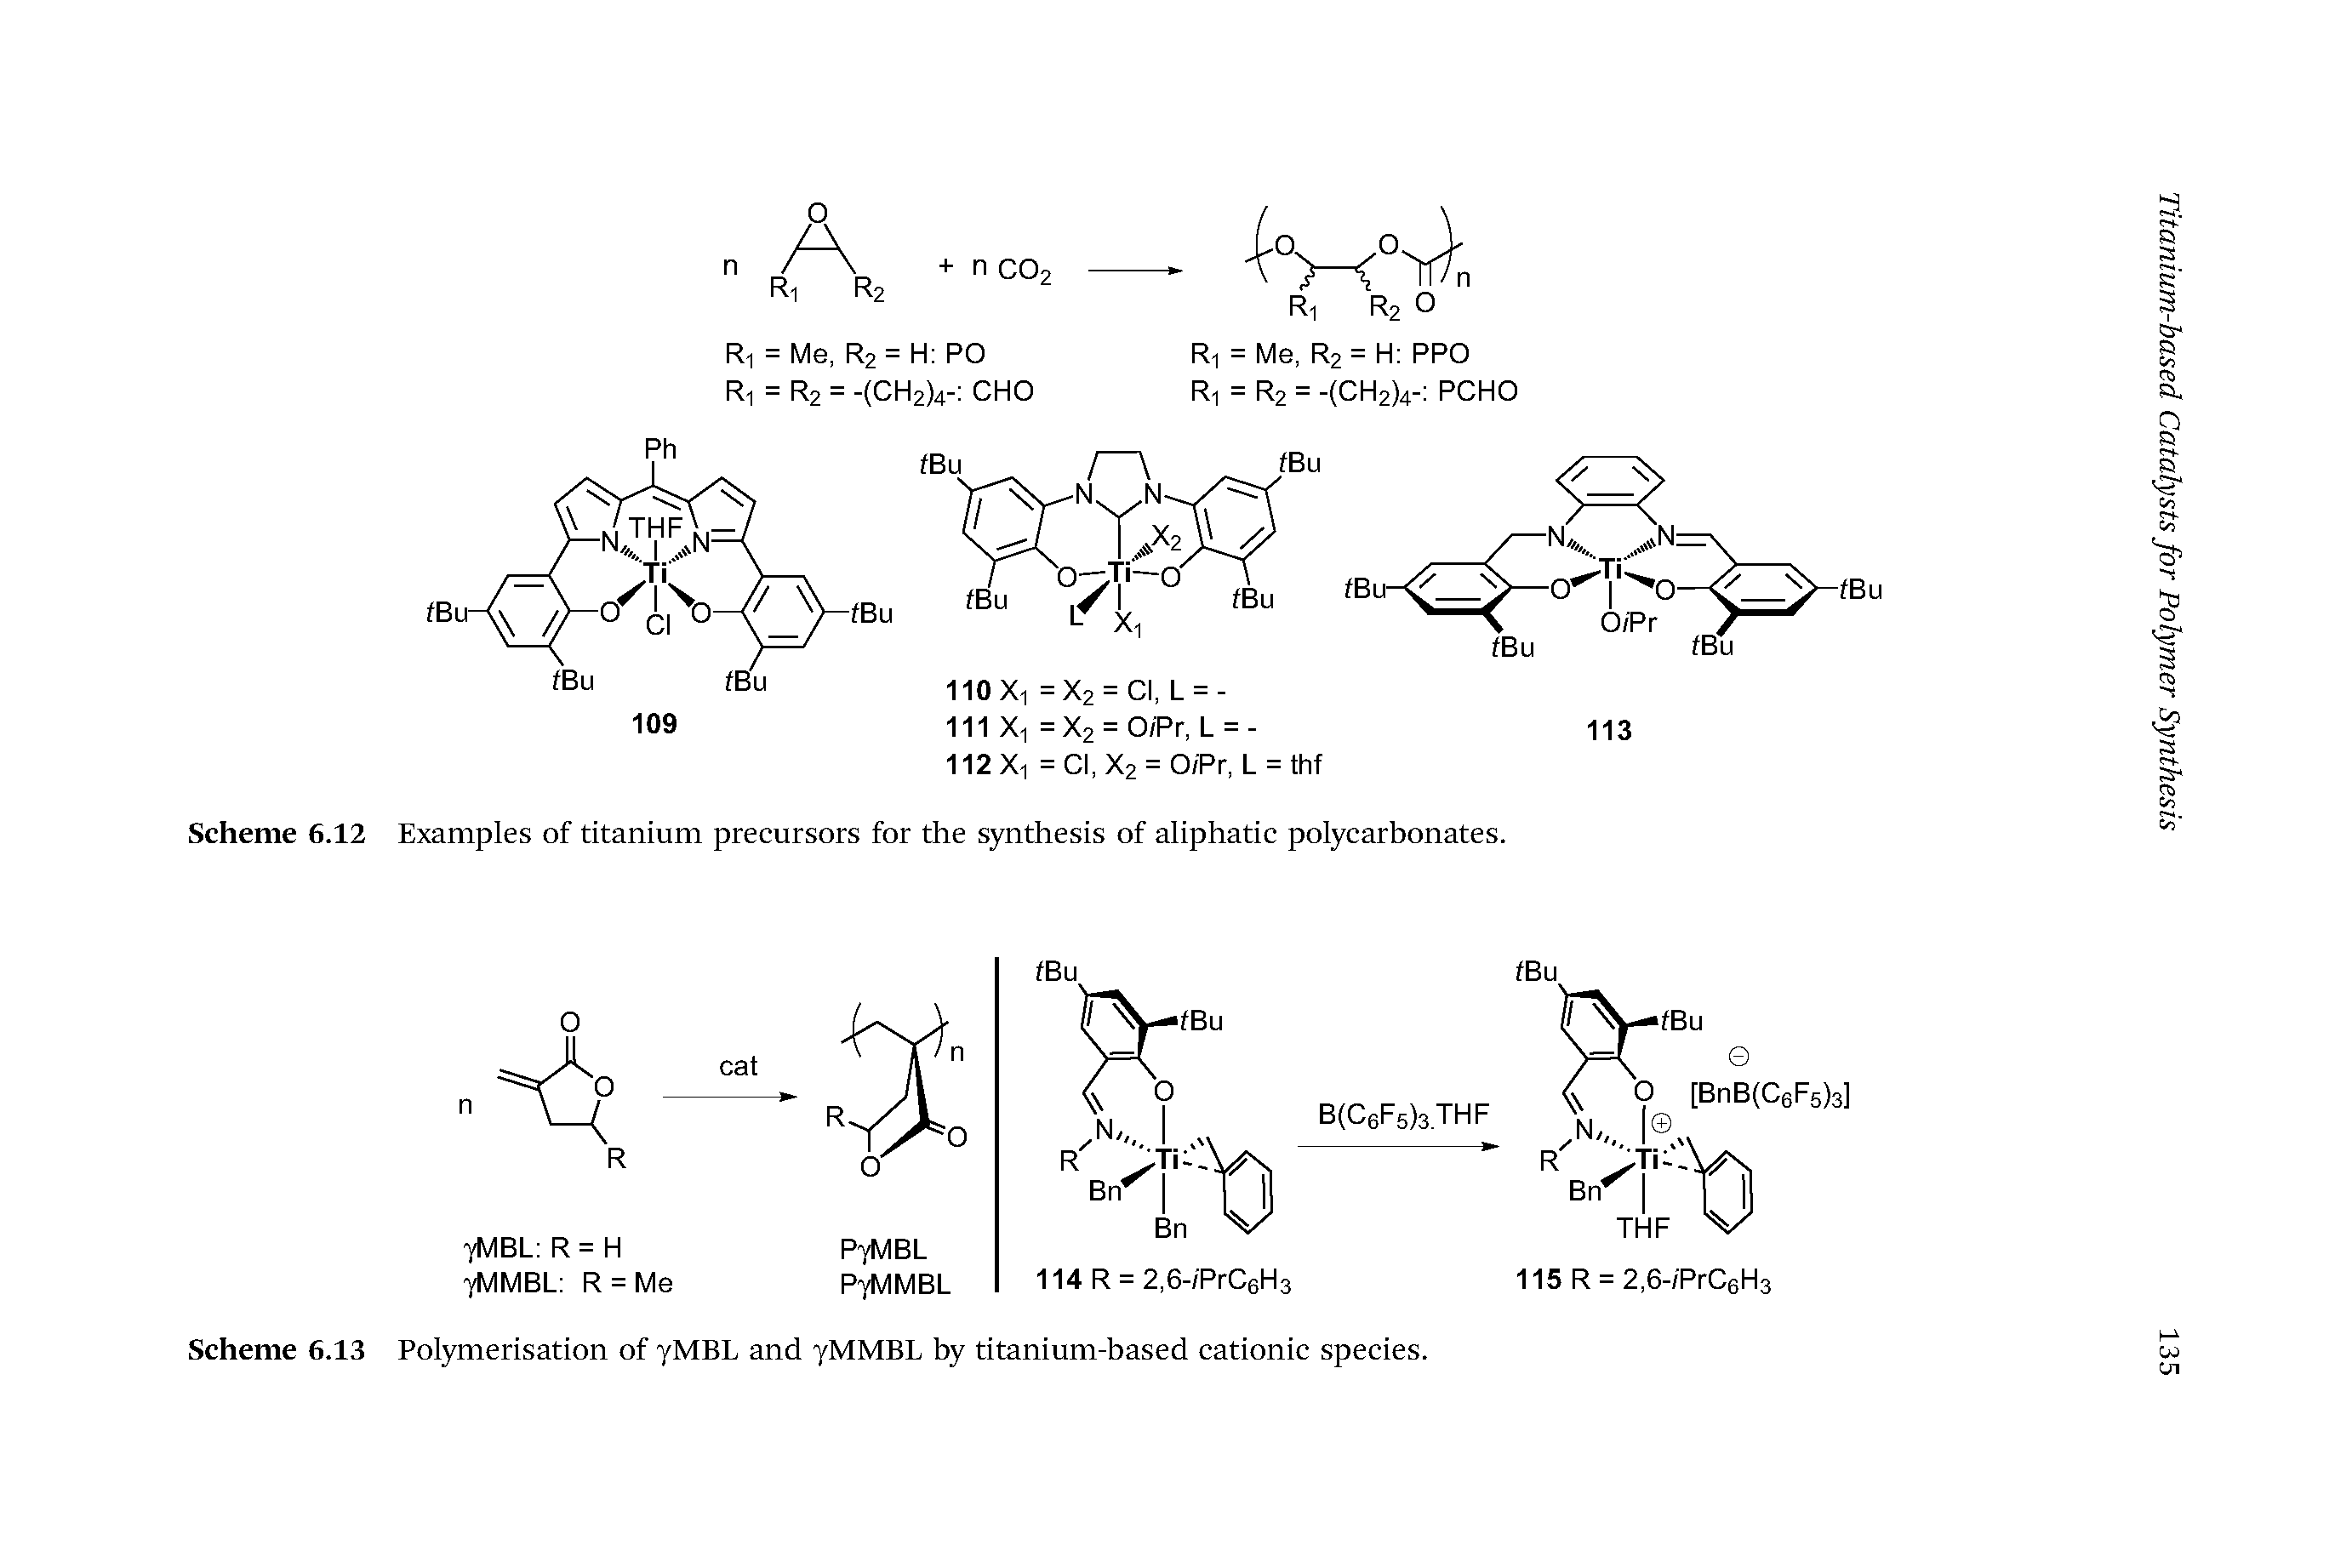 Scheme 6.12 Examples of titanium precursors for the synthesis of aliphatic polycarbonates.